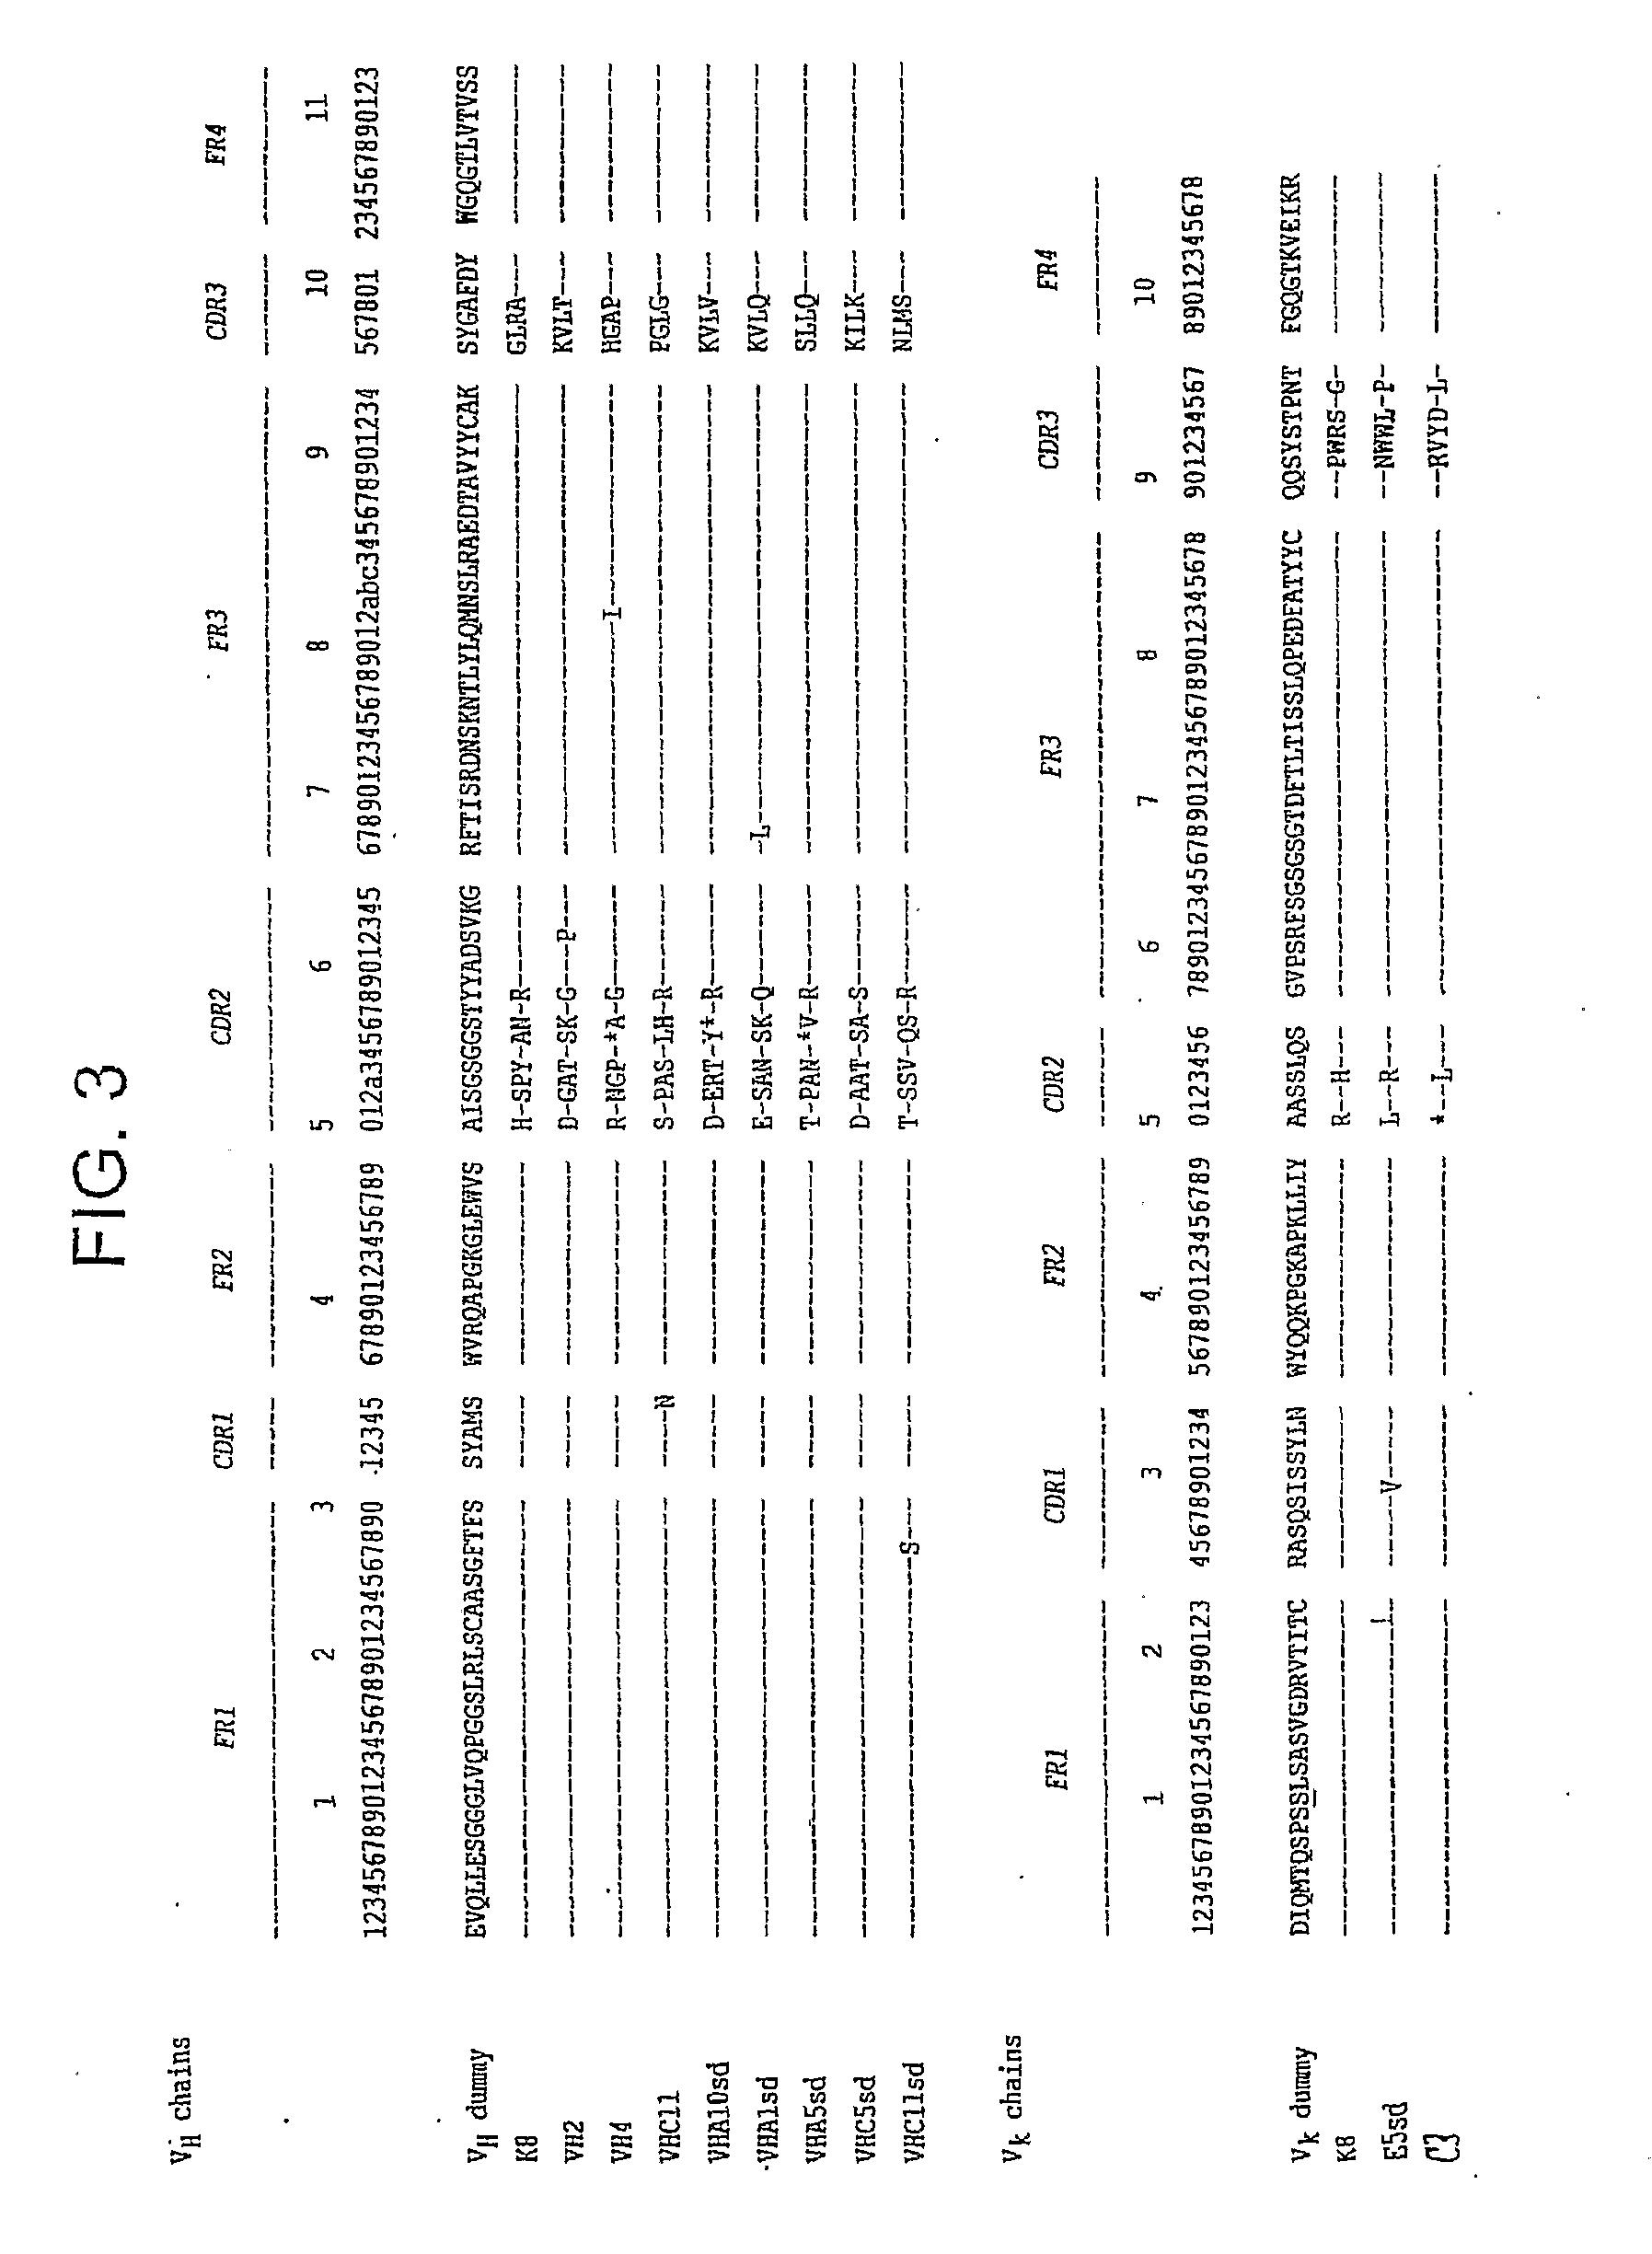 Single domain antibodies against tnfr1 and methods of use therefor